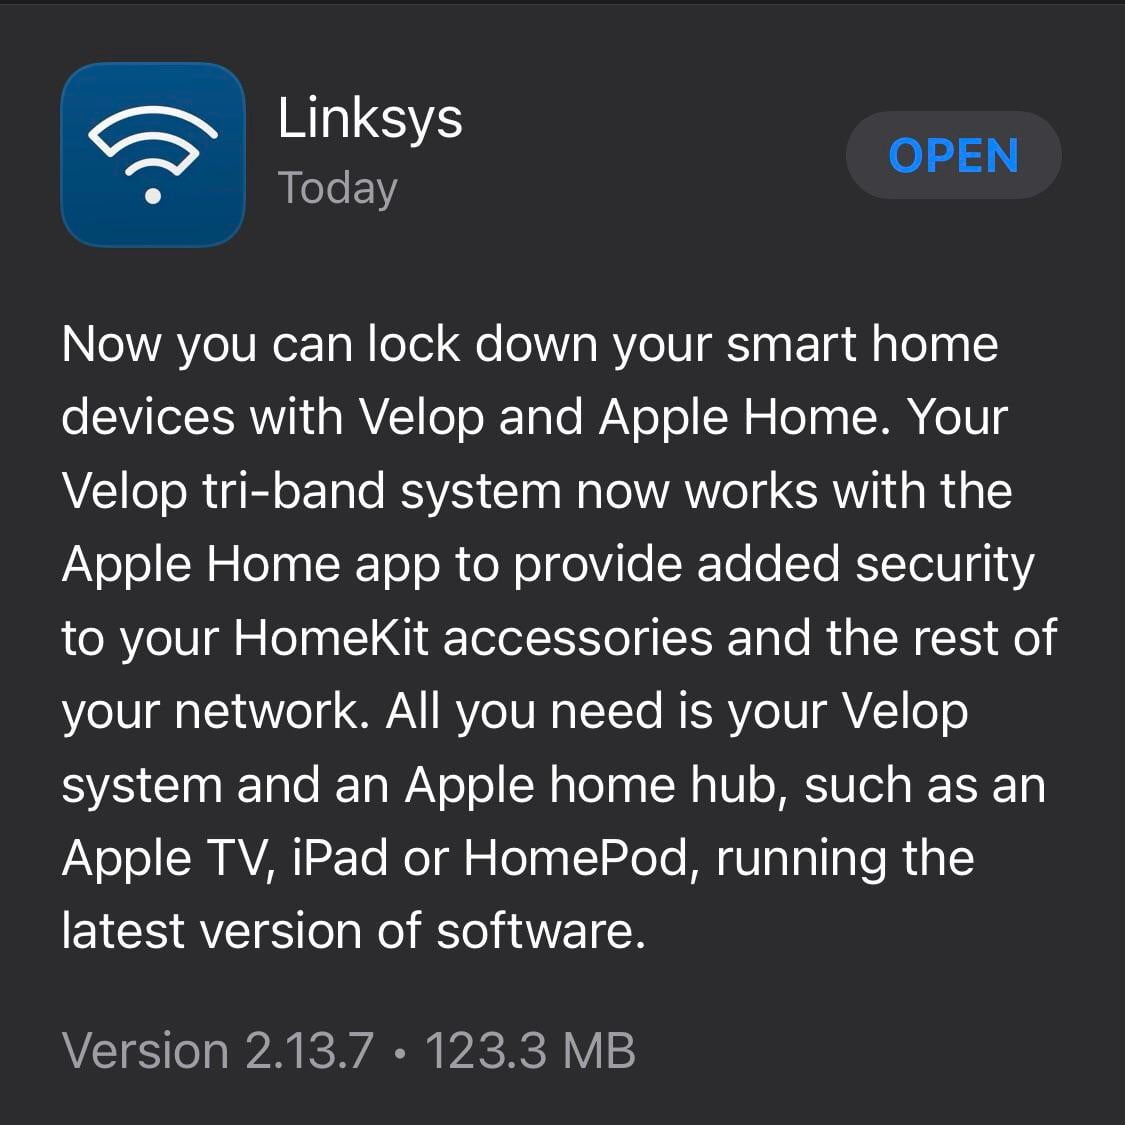 The Linksys app was updated to 2.13.7 today but there